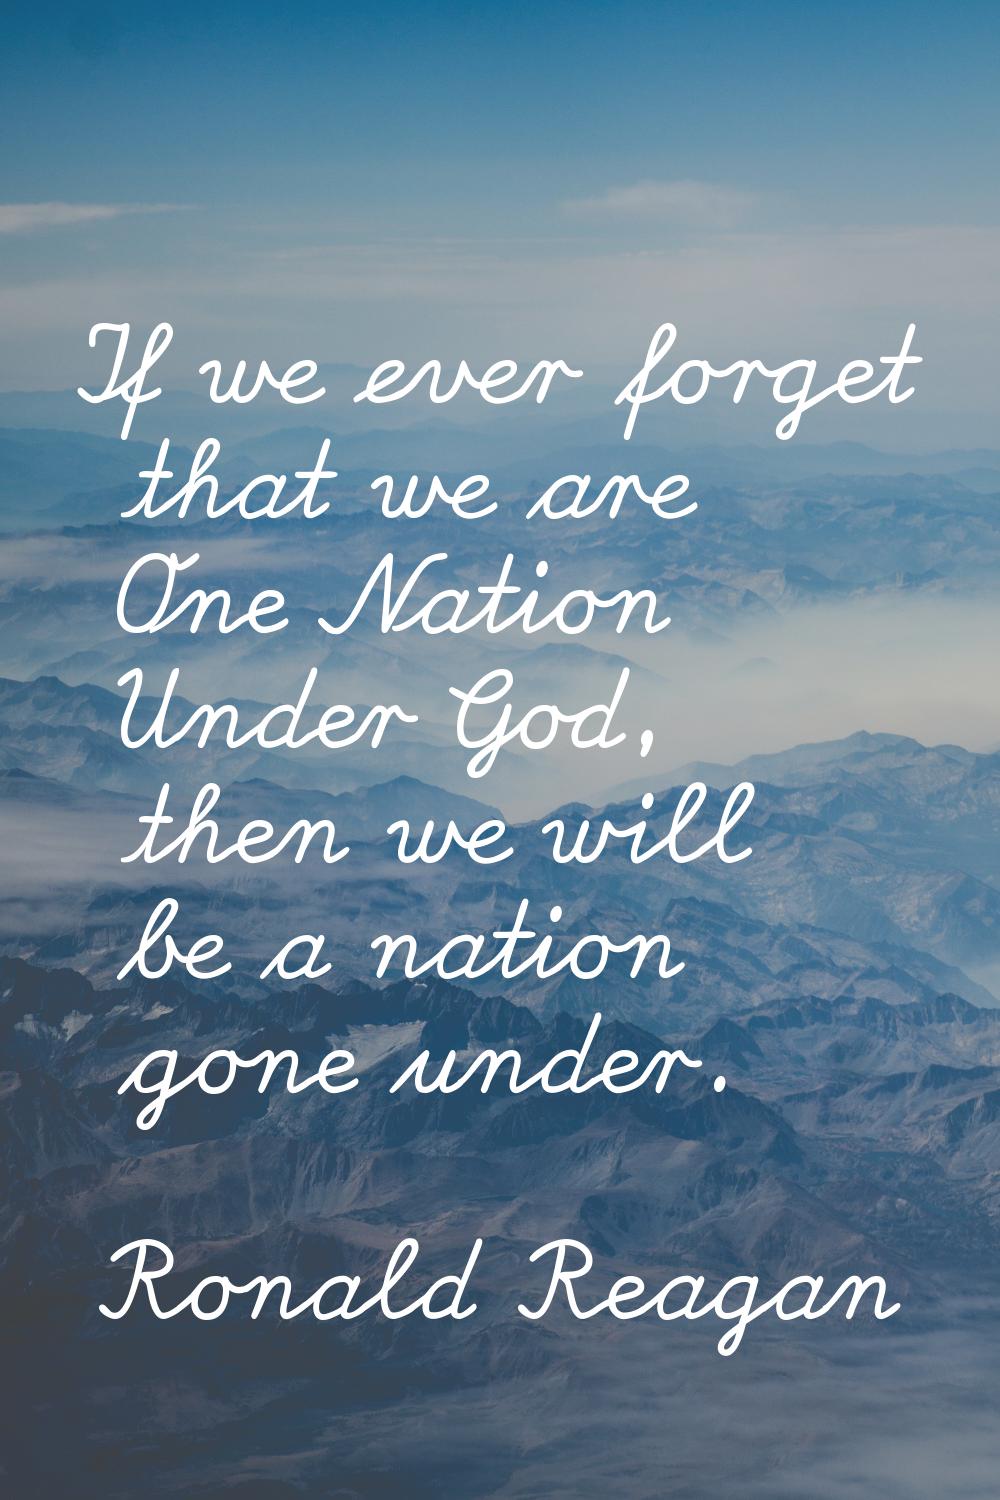 If we ever forget that we are One Nation Under God, then we will be a nation gone under.